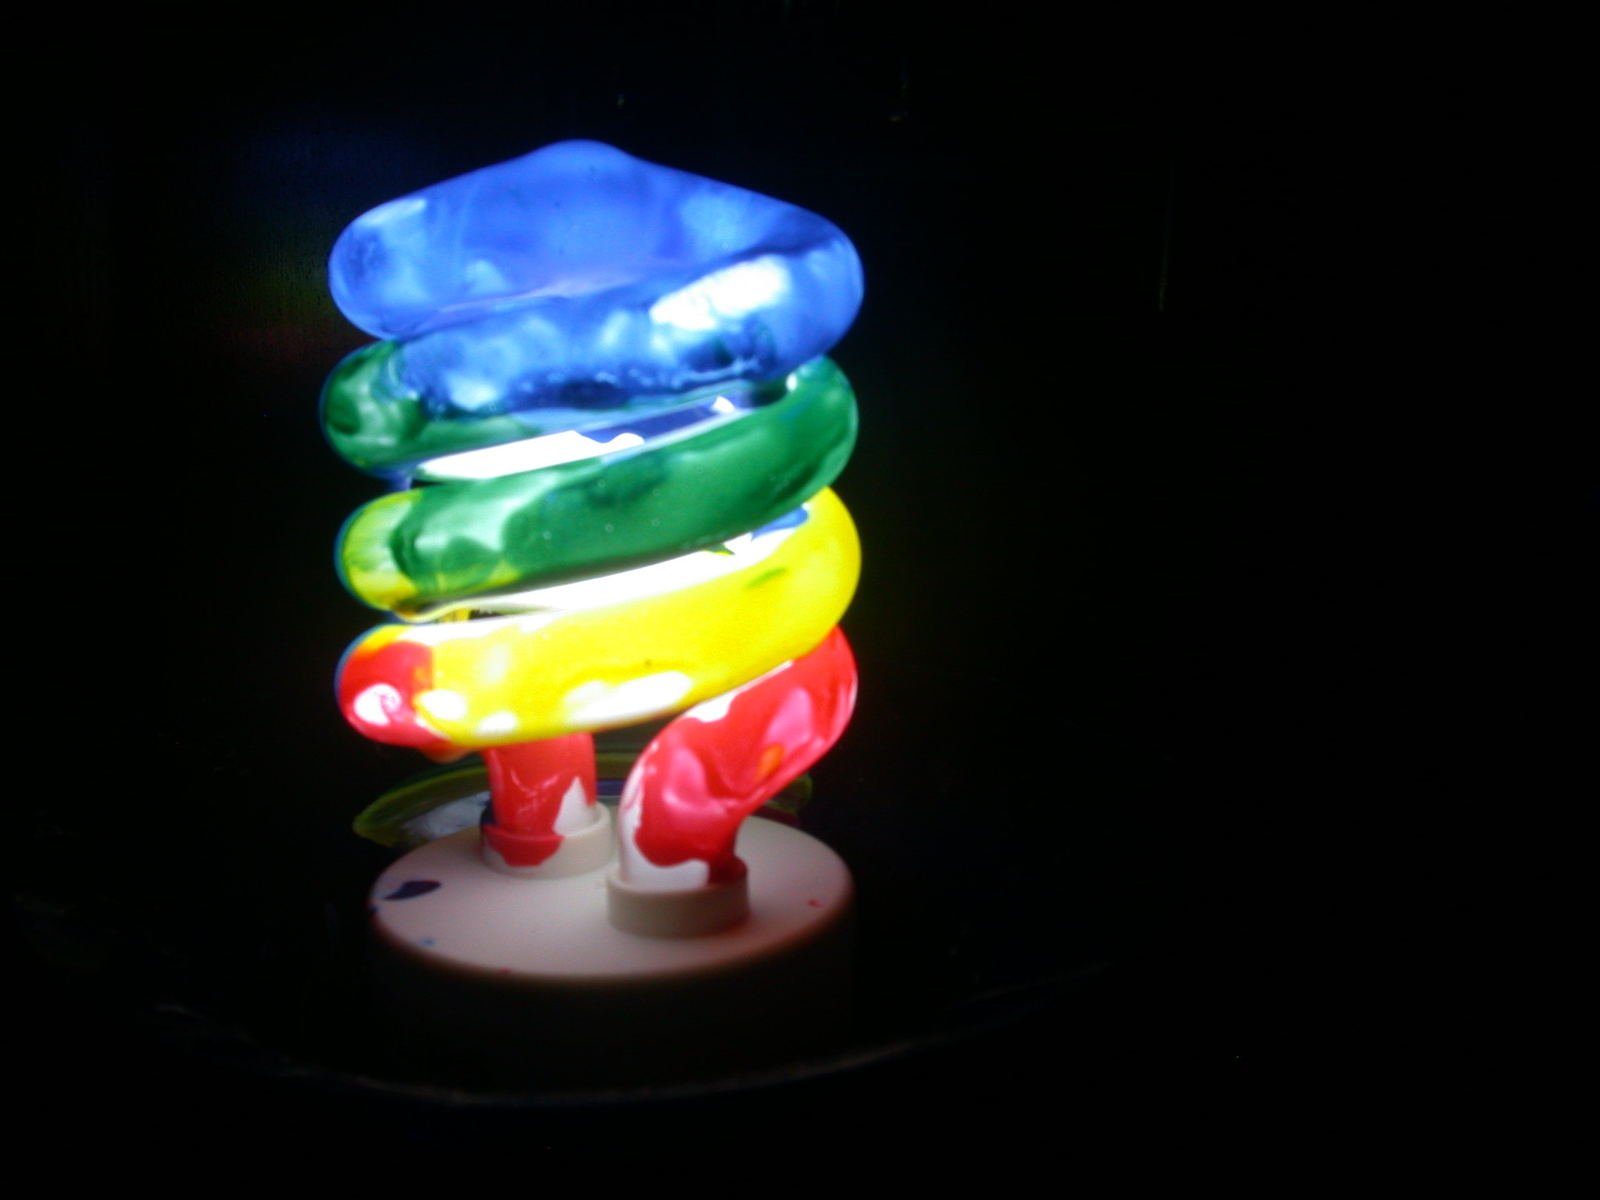 a small lit toy is shown at night